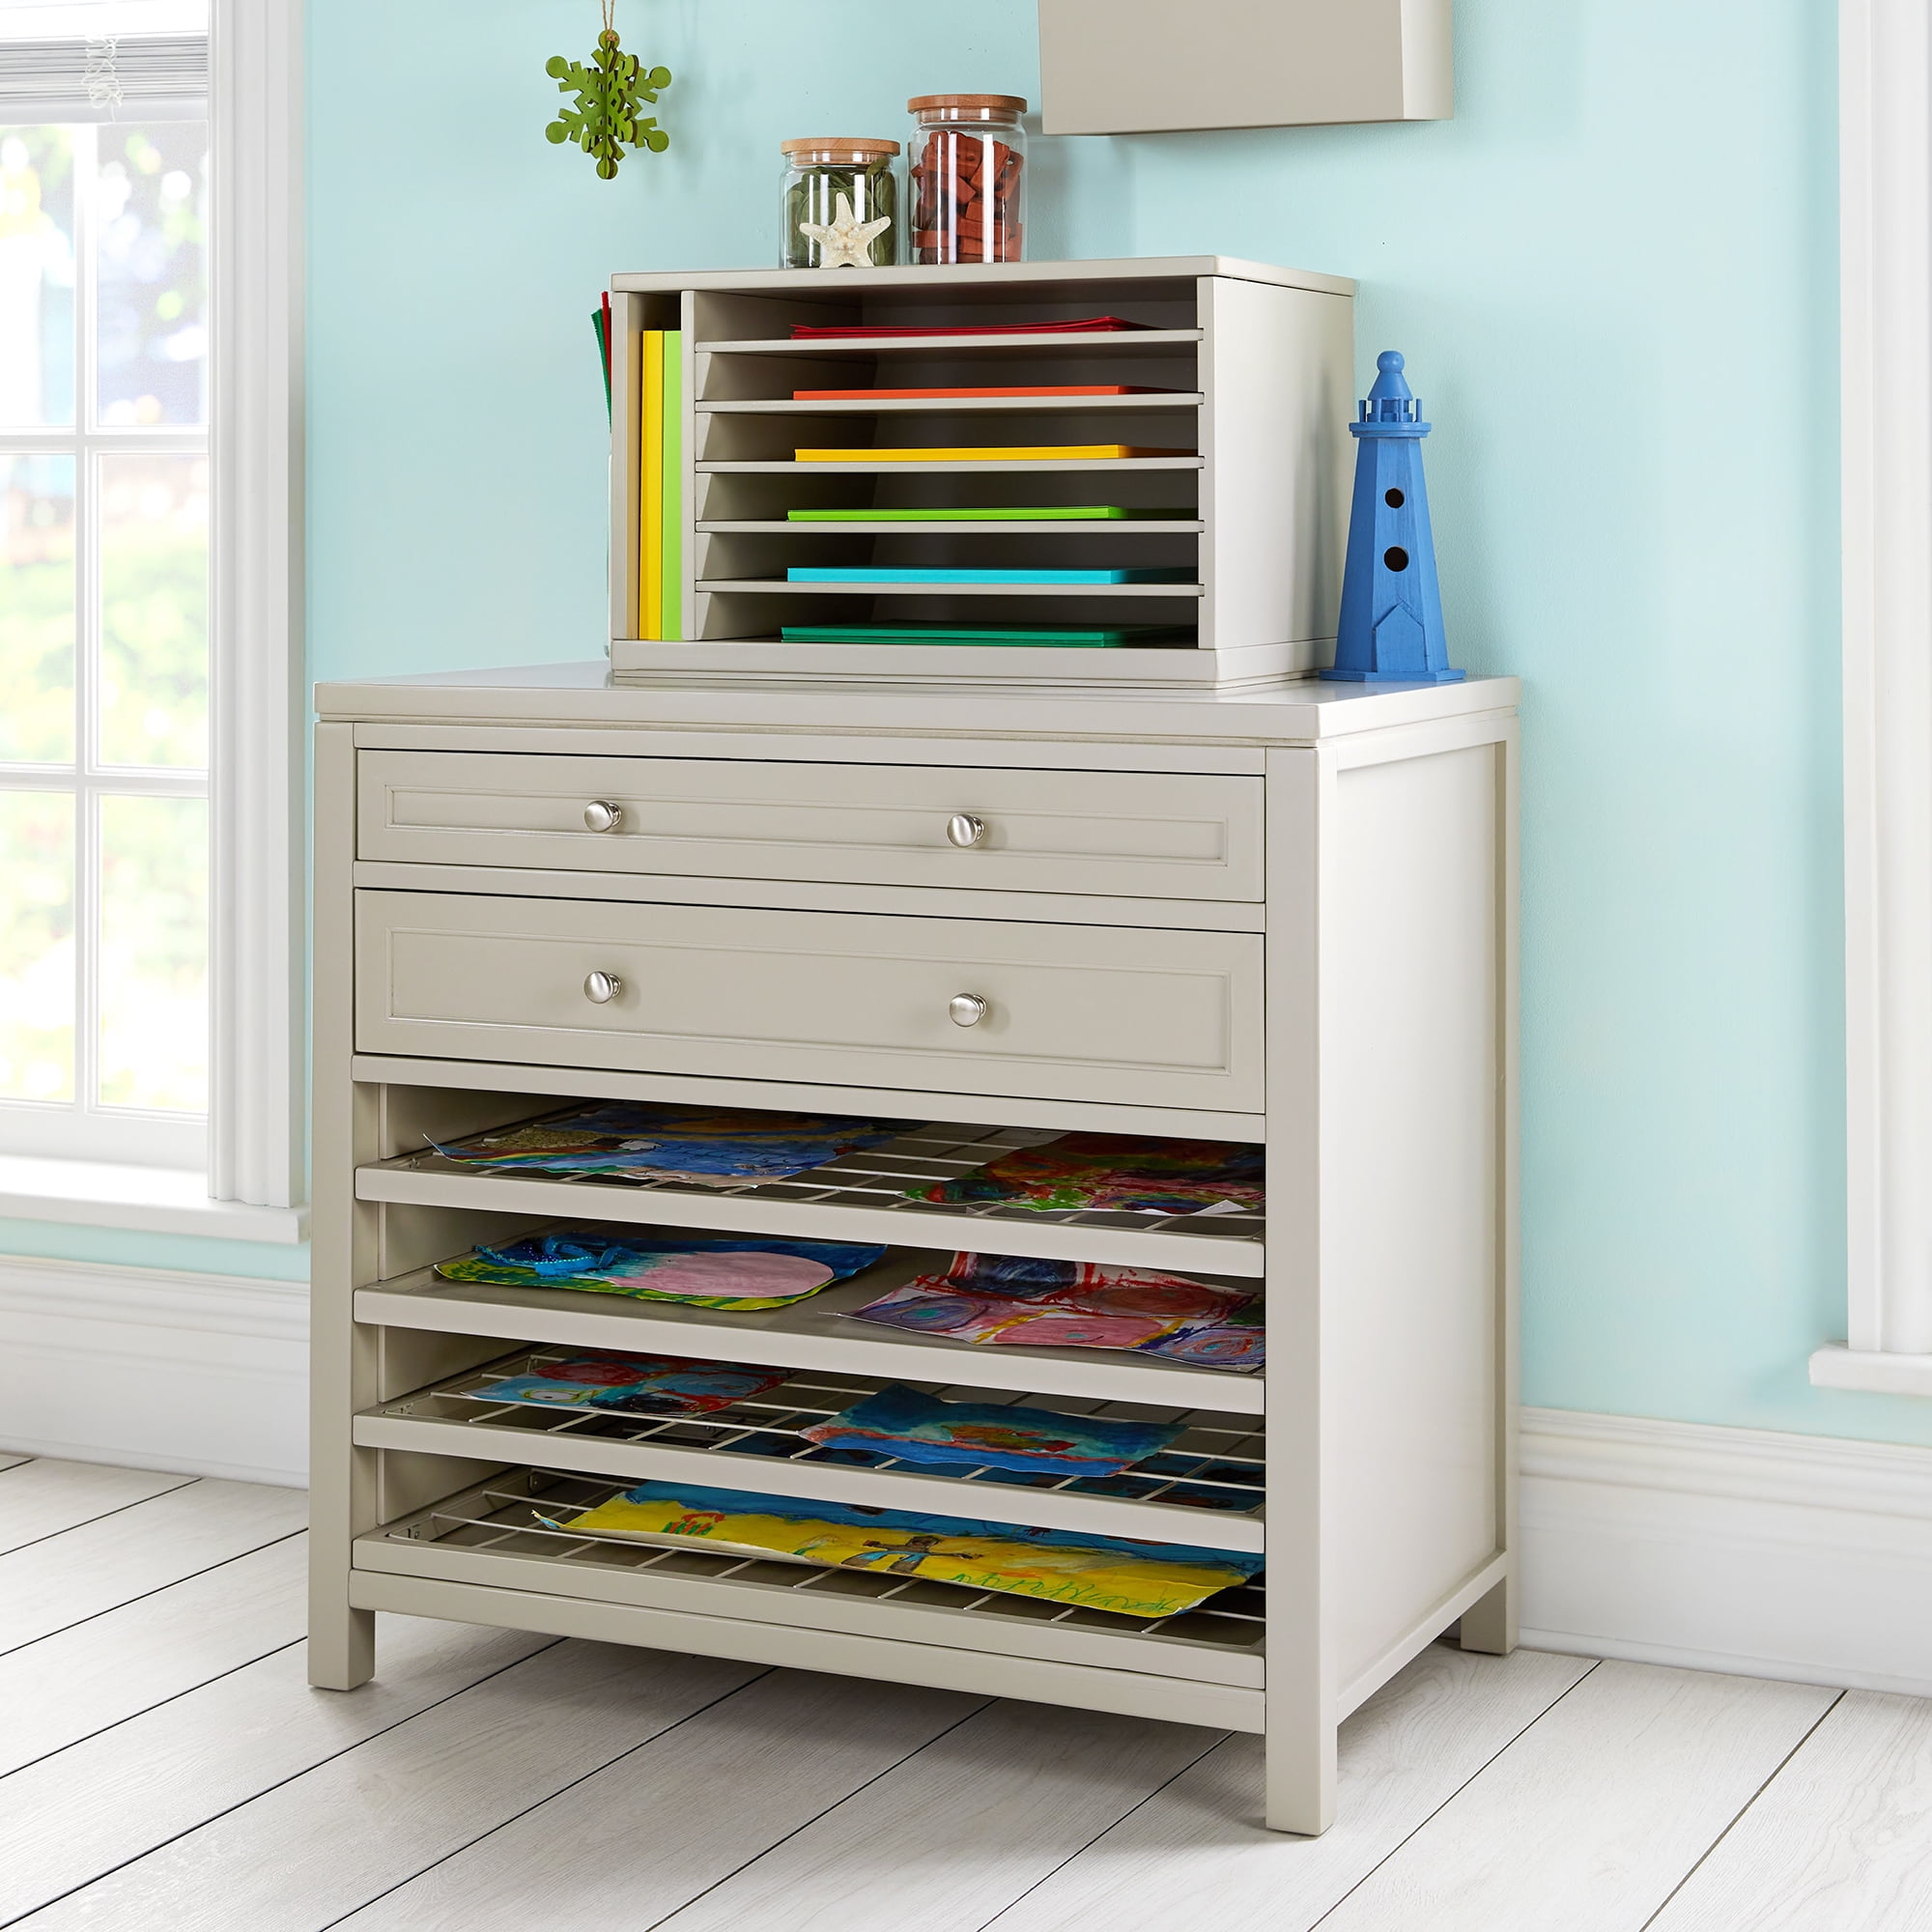 Martha Stewart Crafting Kids' Art Storage with Drying Racks - Gray, Wooden  Arts and Crafts Organizer with Removable Wire Racks and Painting Drip Pan